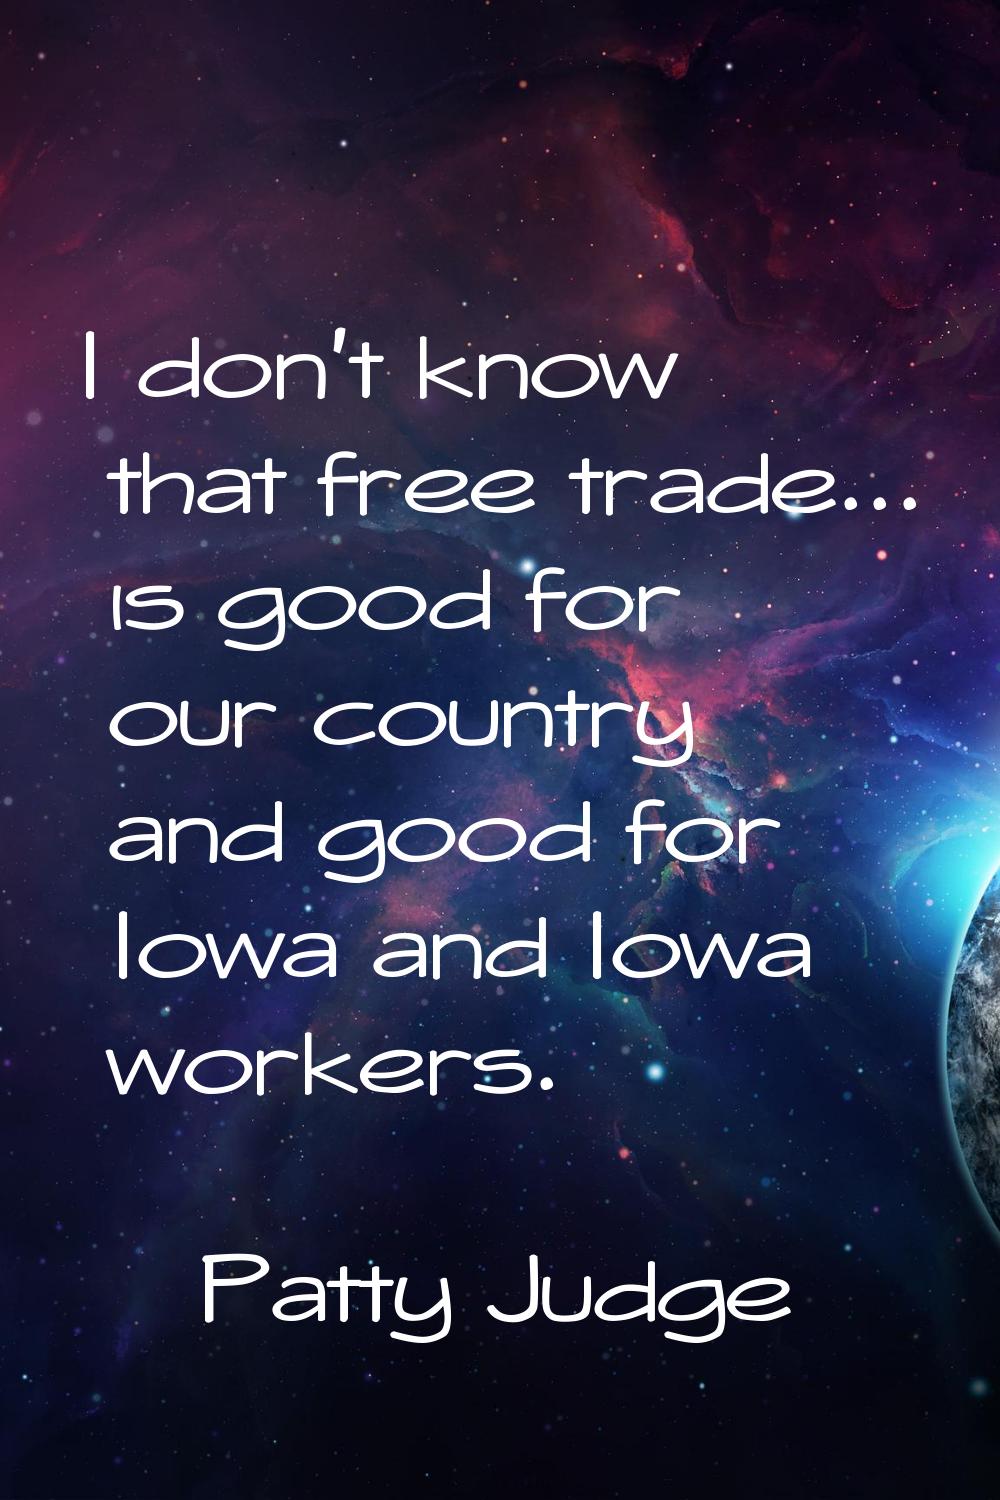 I don't know that free trade... is good for our country and good for Iowa and Iowa workers.